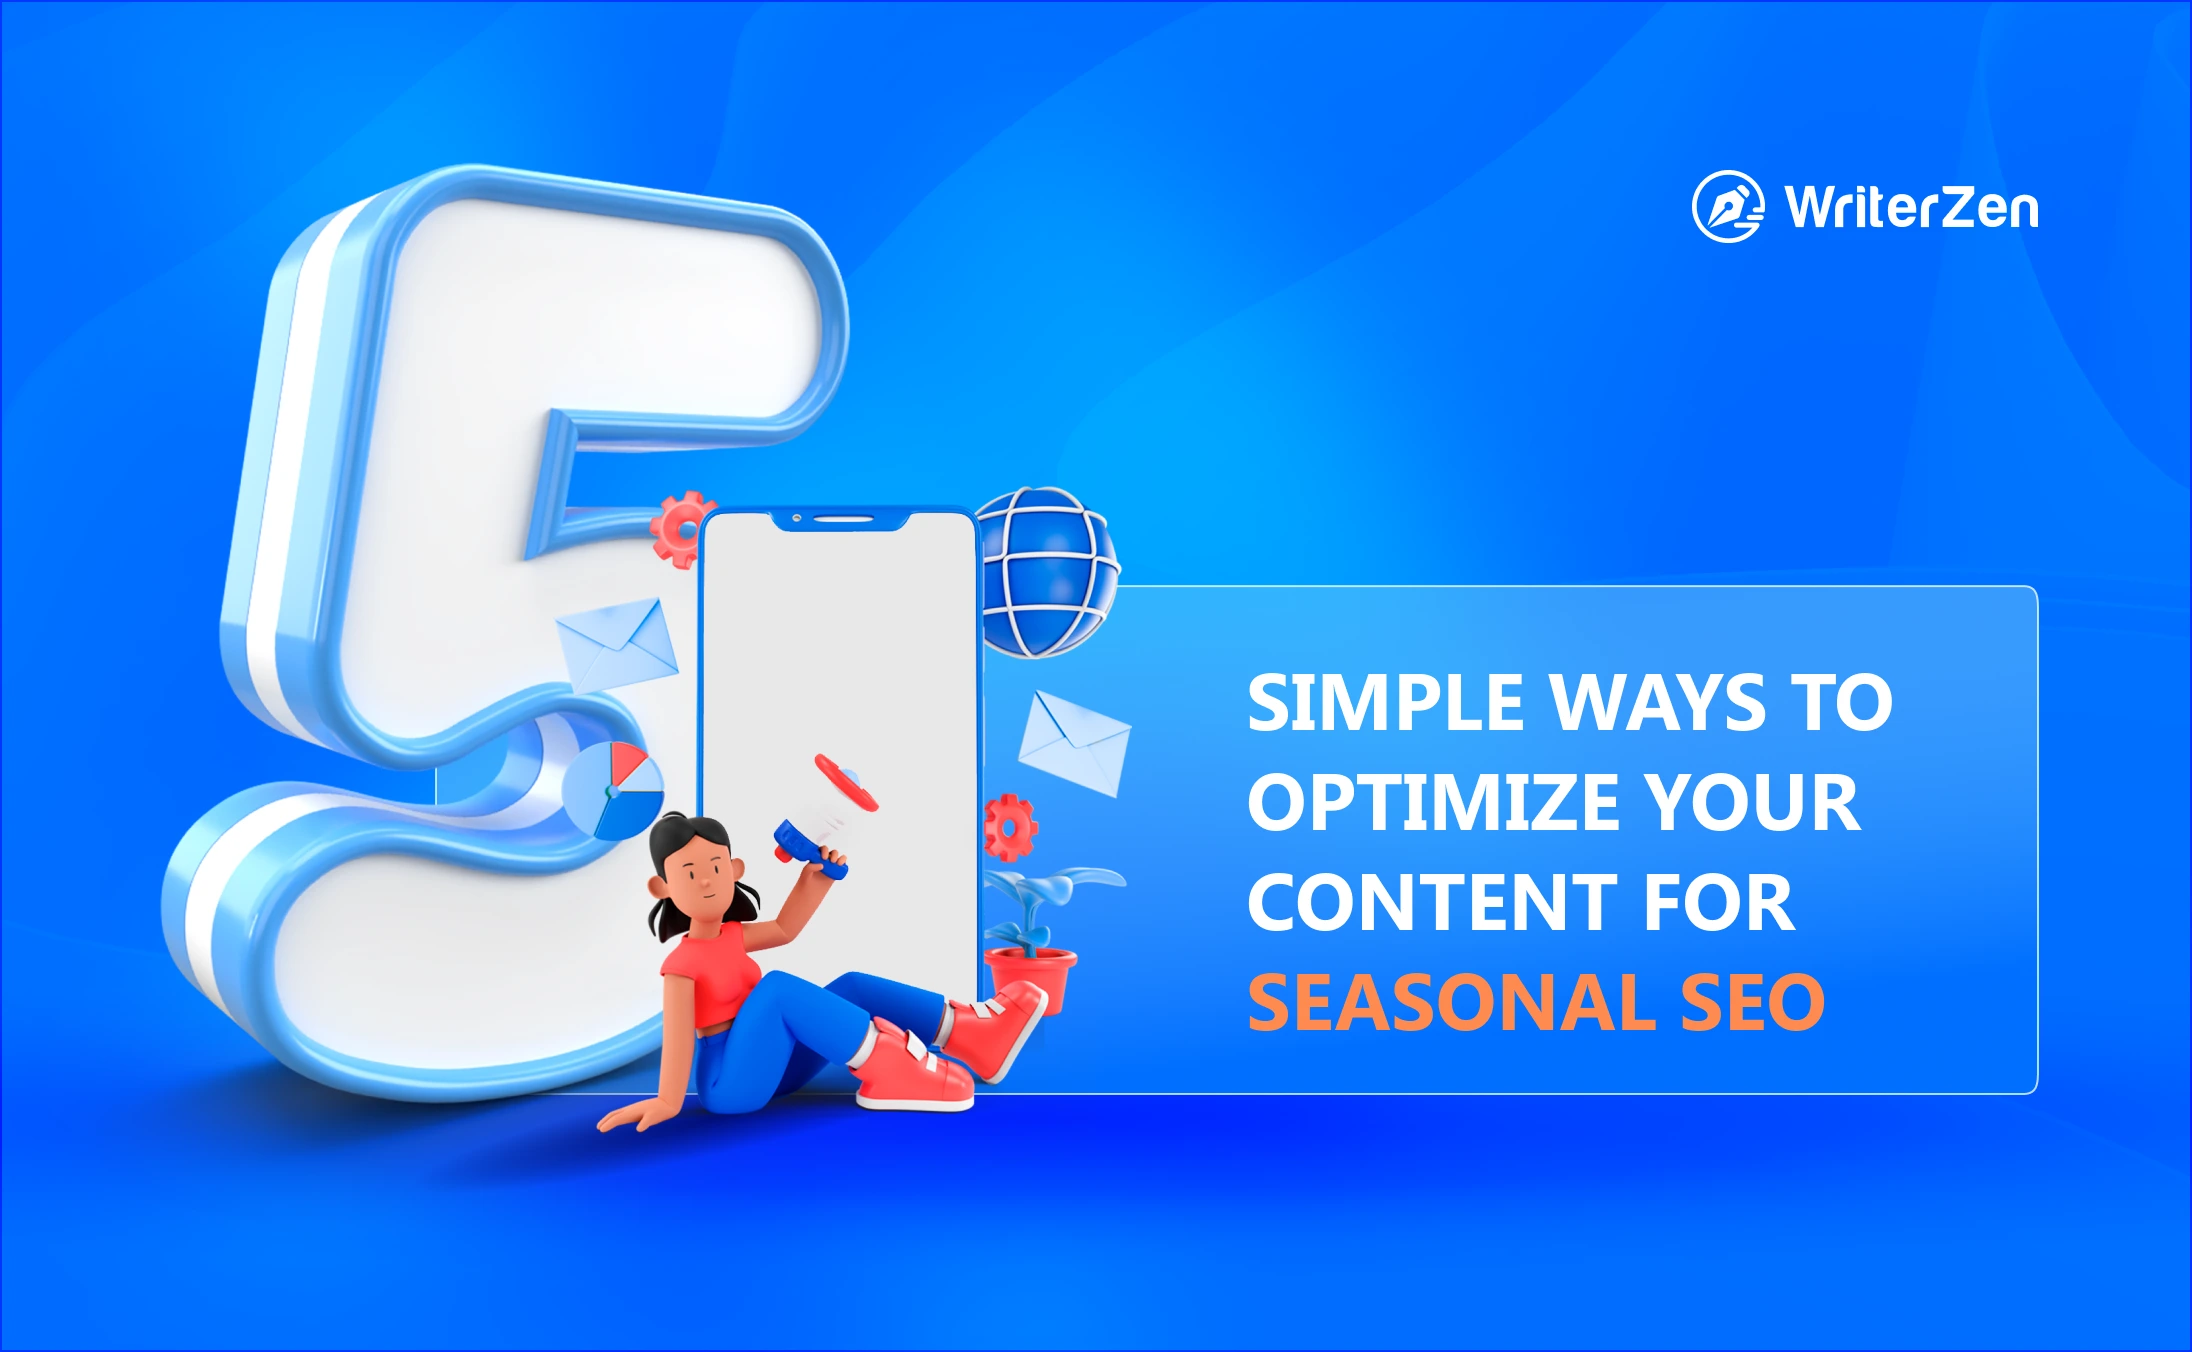 5 Simple Ways to Optimize Your Content for Seasonal SEO